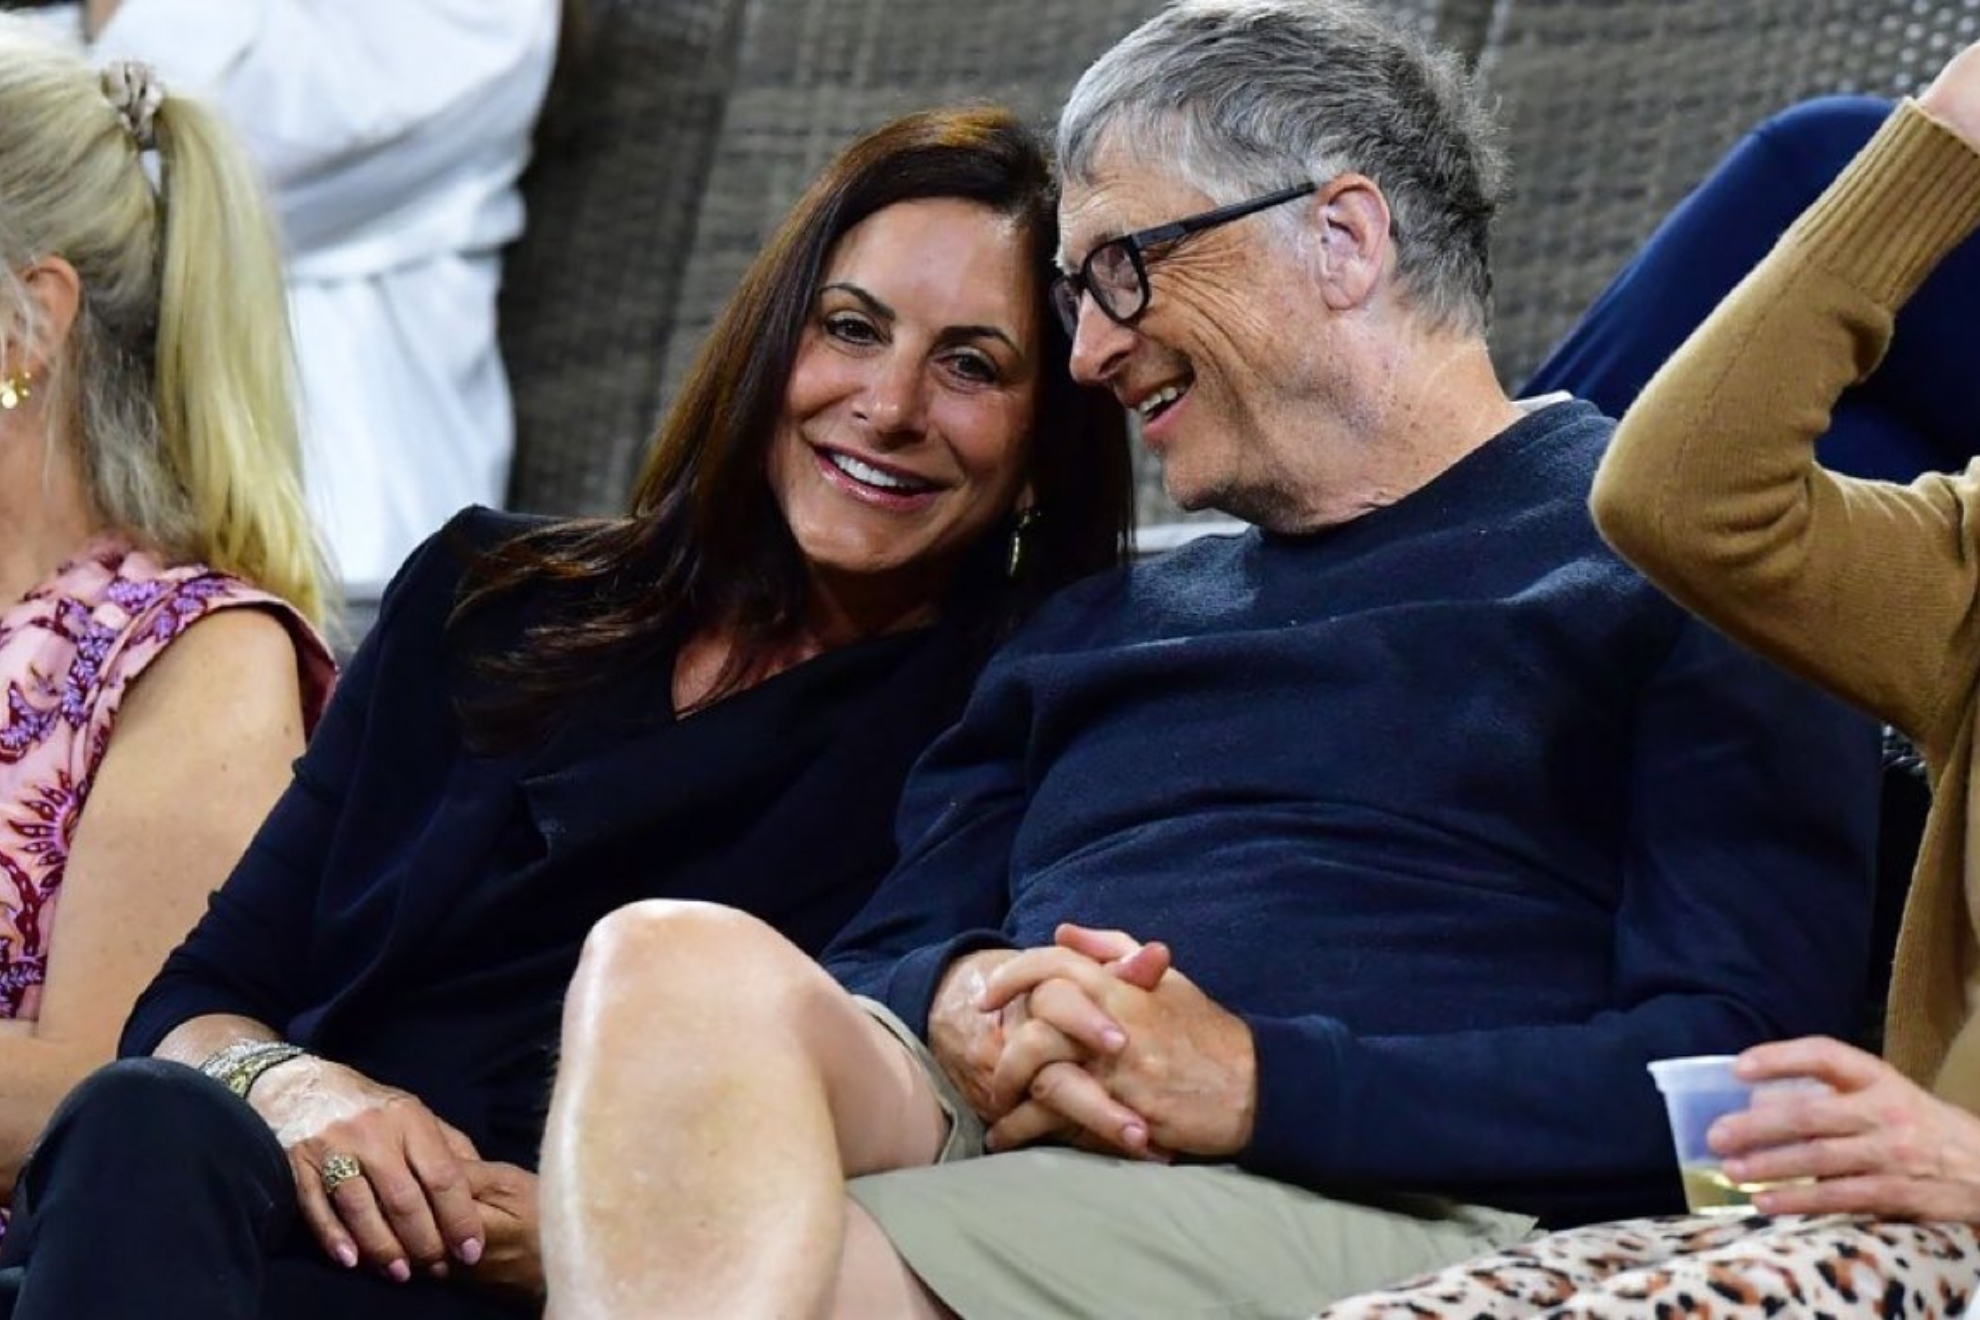 Paula Hurd and Bill Gates have been allegedly dating for a while